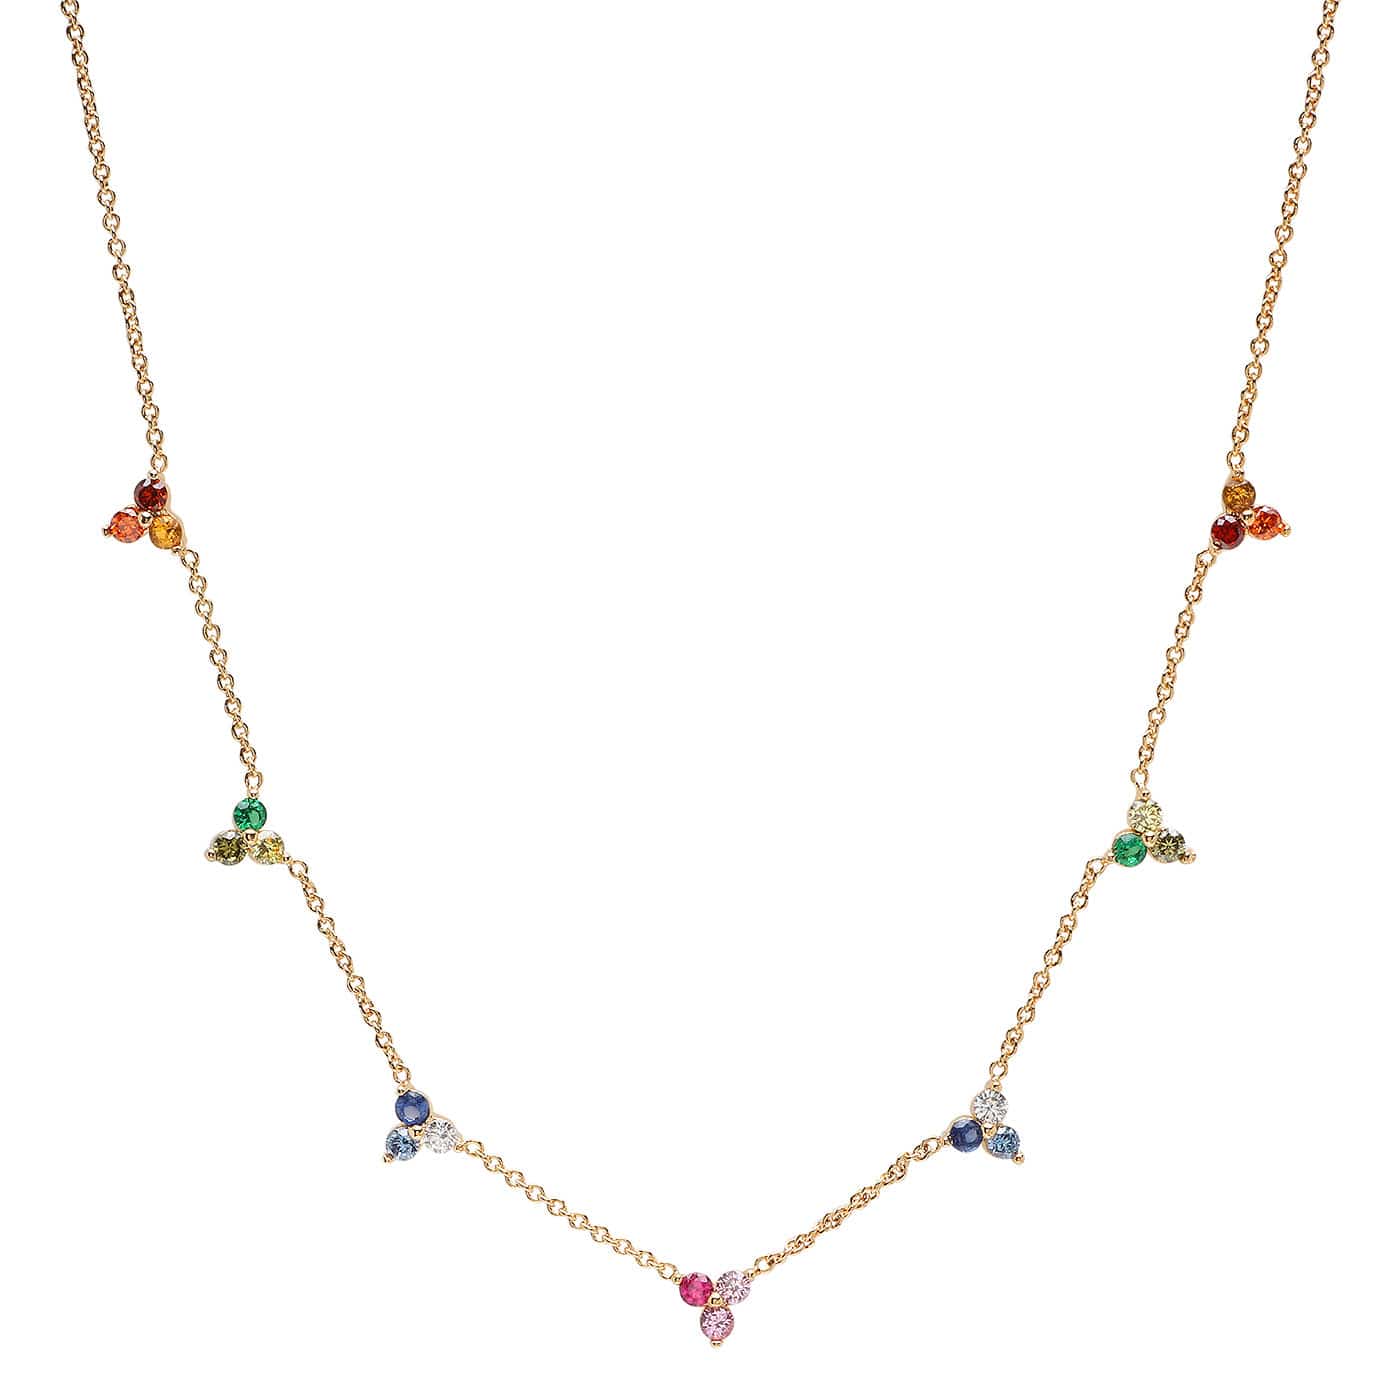 TAI JEWELRY Necklace Rainbow Ombre Cluster Necklace